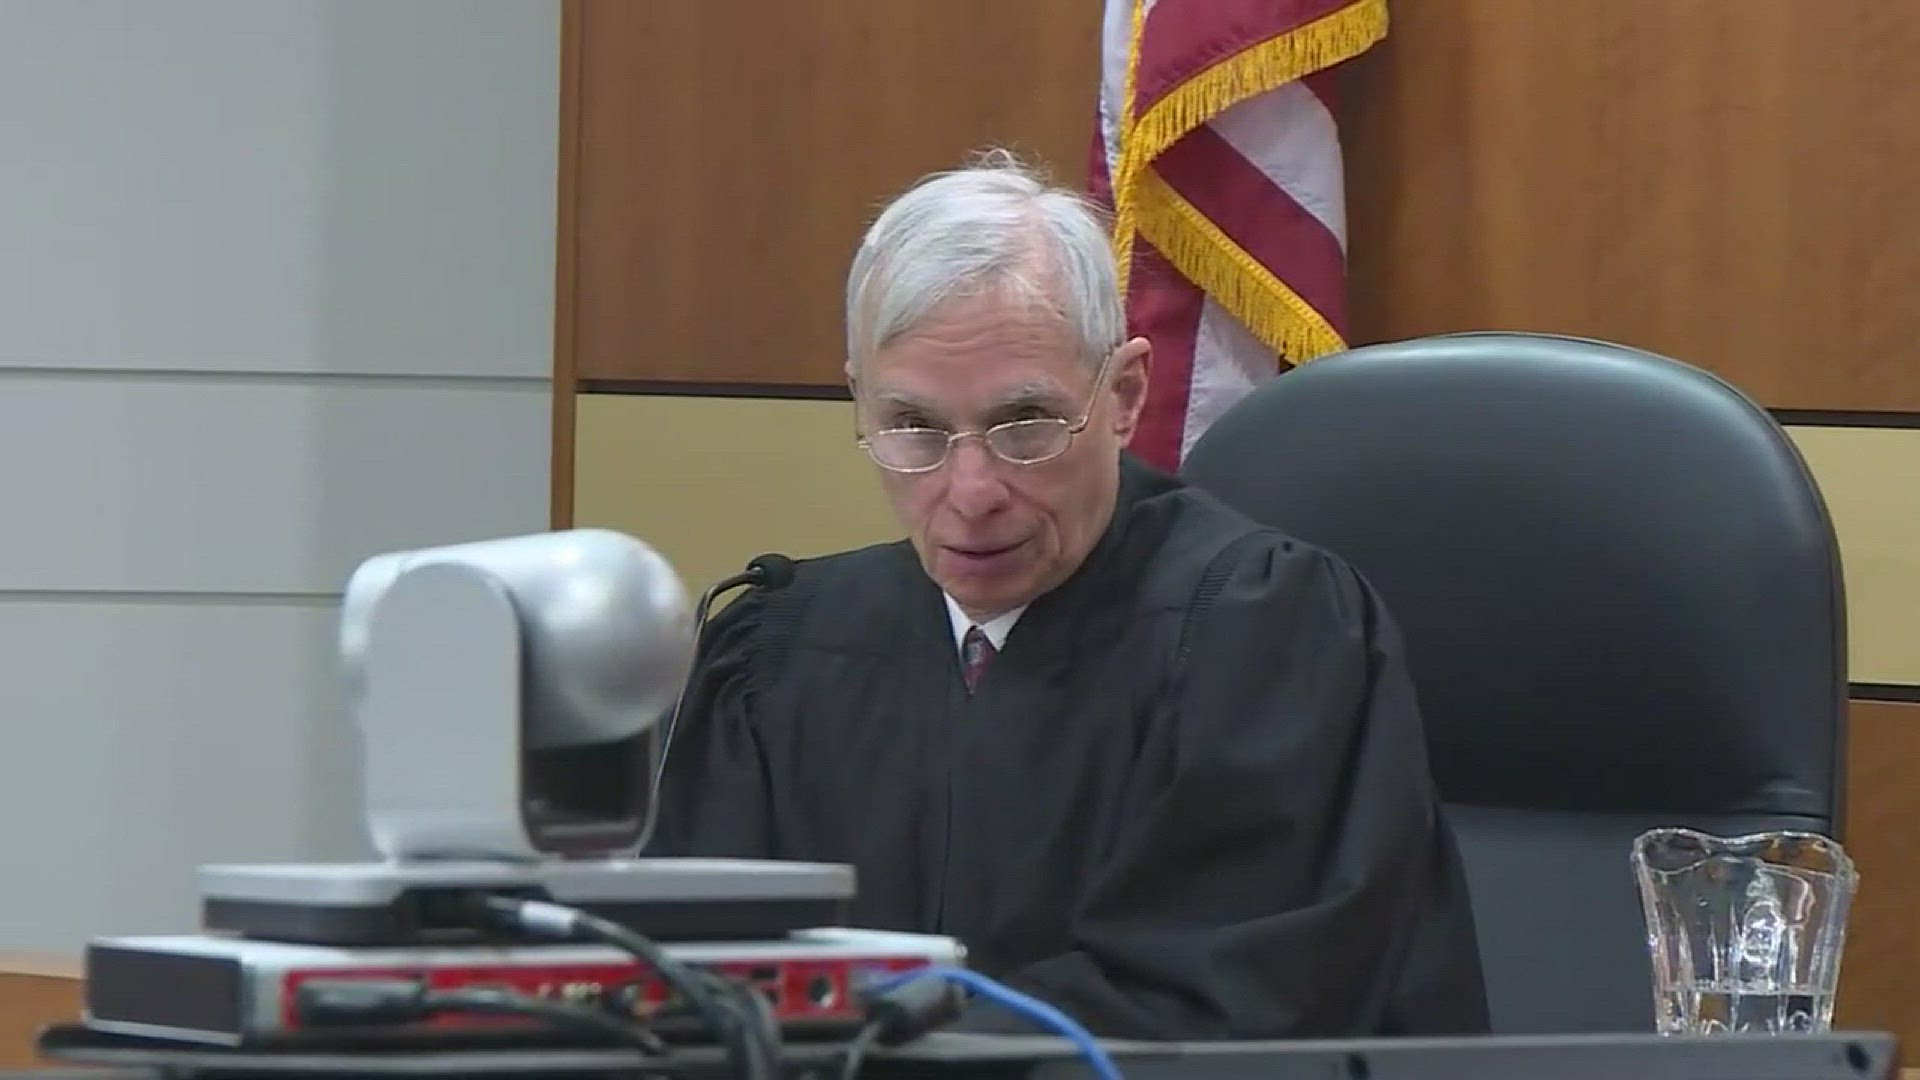 Judge James Miraldi explains his decision to grant early release to Adrianna Young, the woman who crashed a car into a home and killed a mother of two.